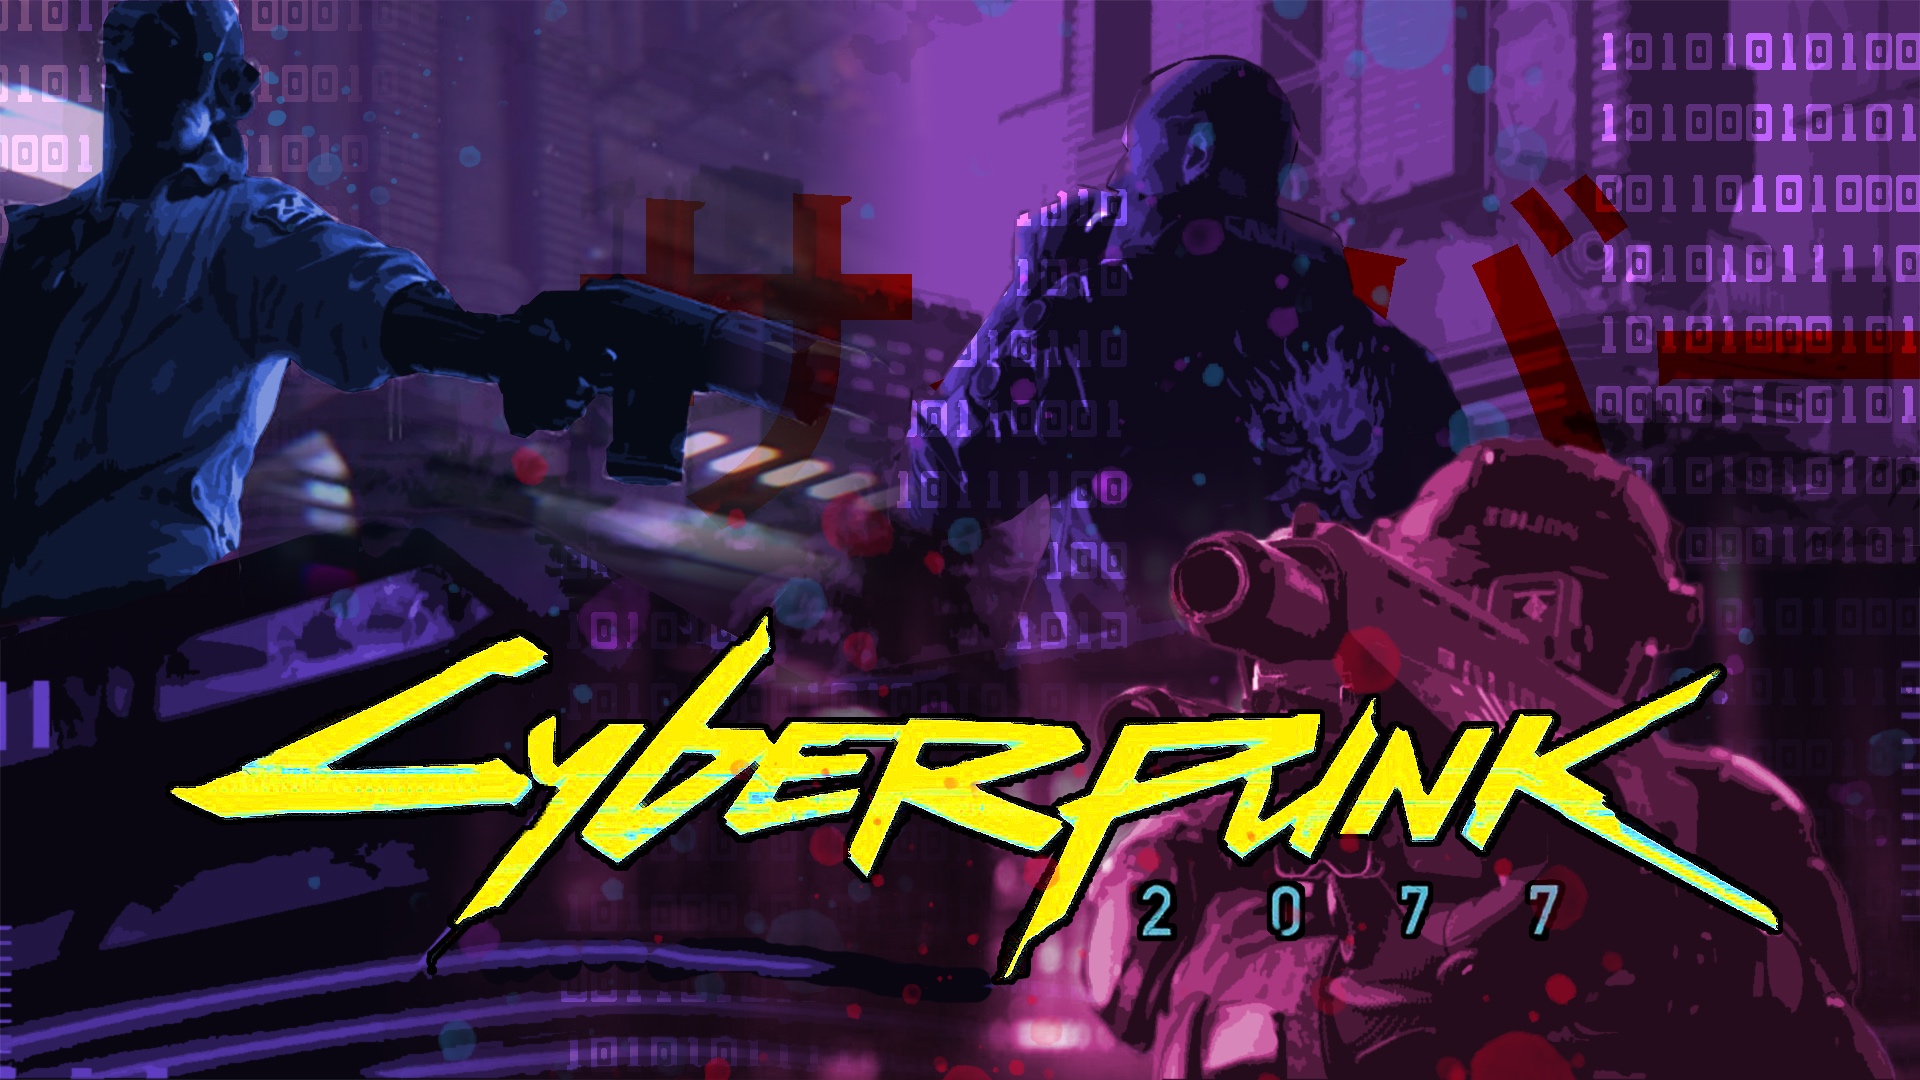 Cyberpunk 2077 – Is All Ready To Restrict Usage Of Cybernetics